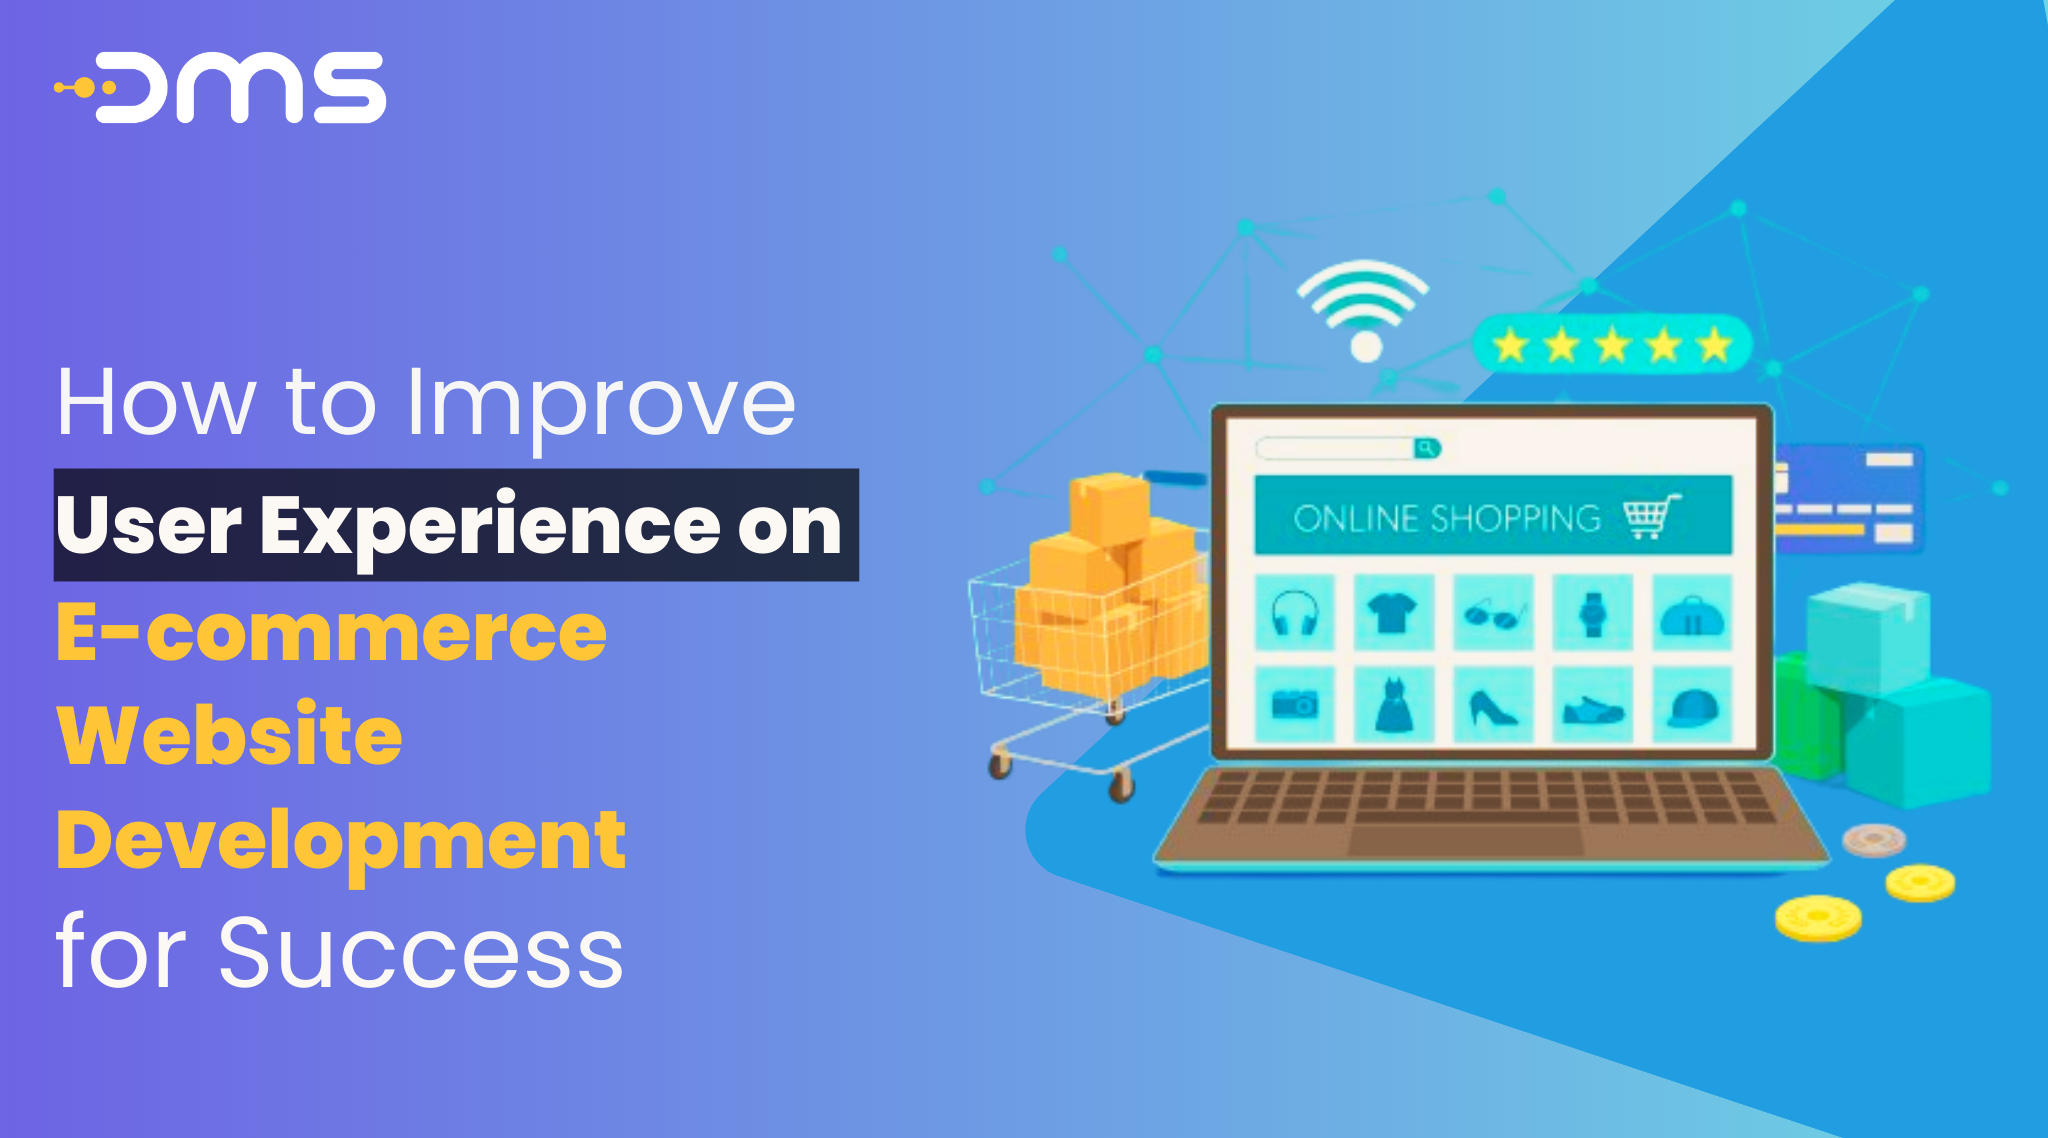 How to Improve User Experience on E-commerce Website Development for Success